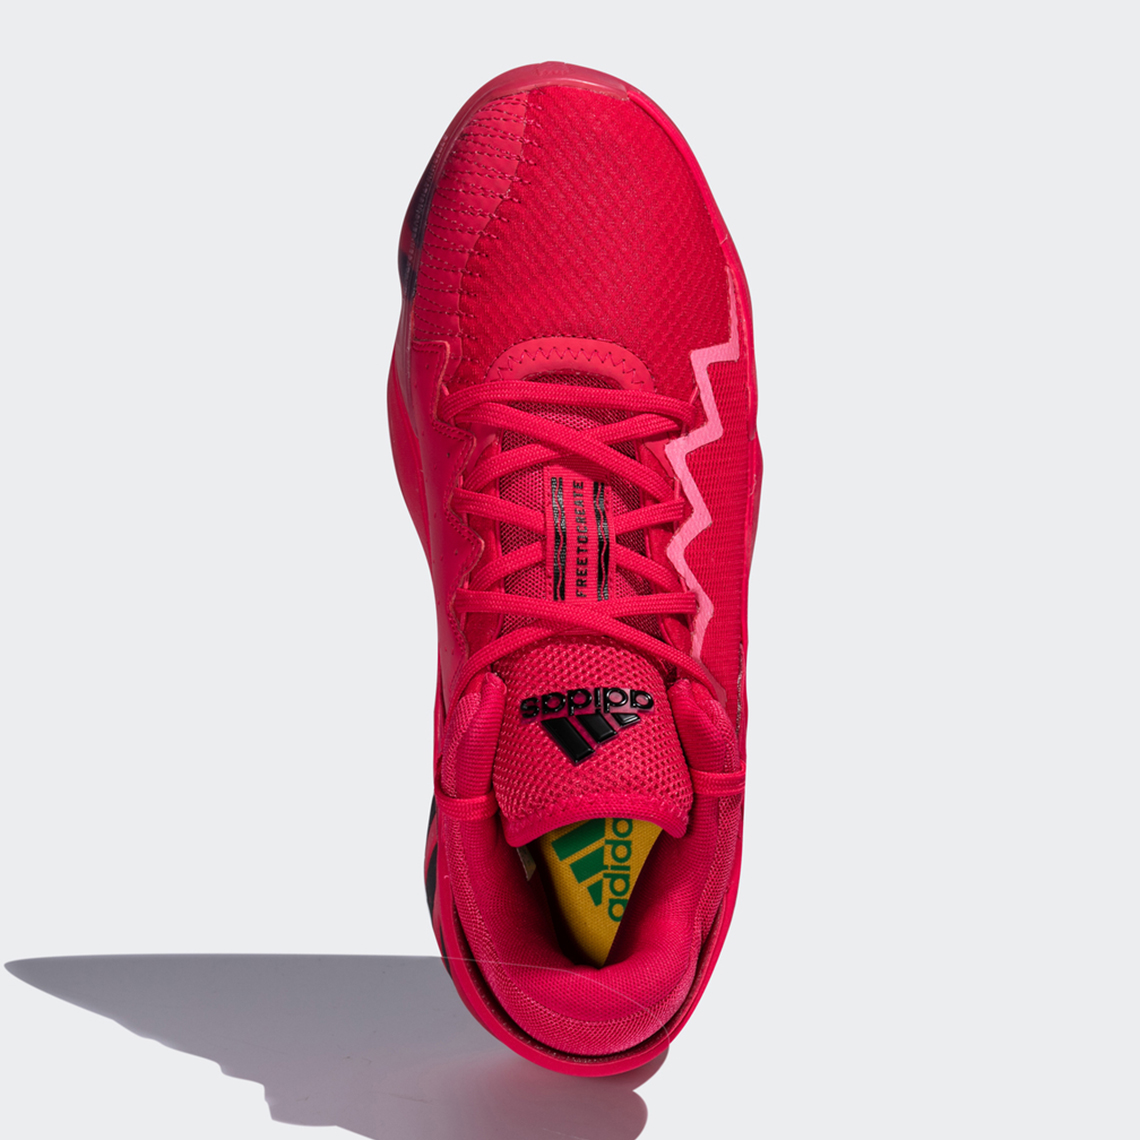 Adidas Don Issue 2 Crayon Red 5